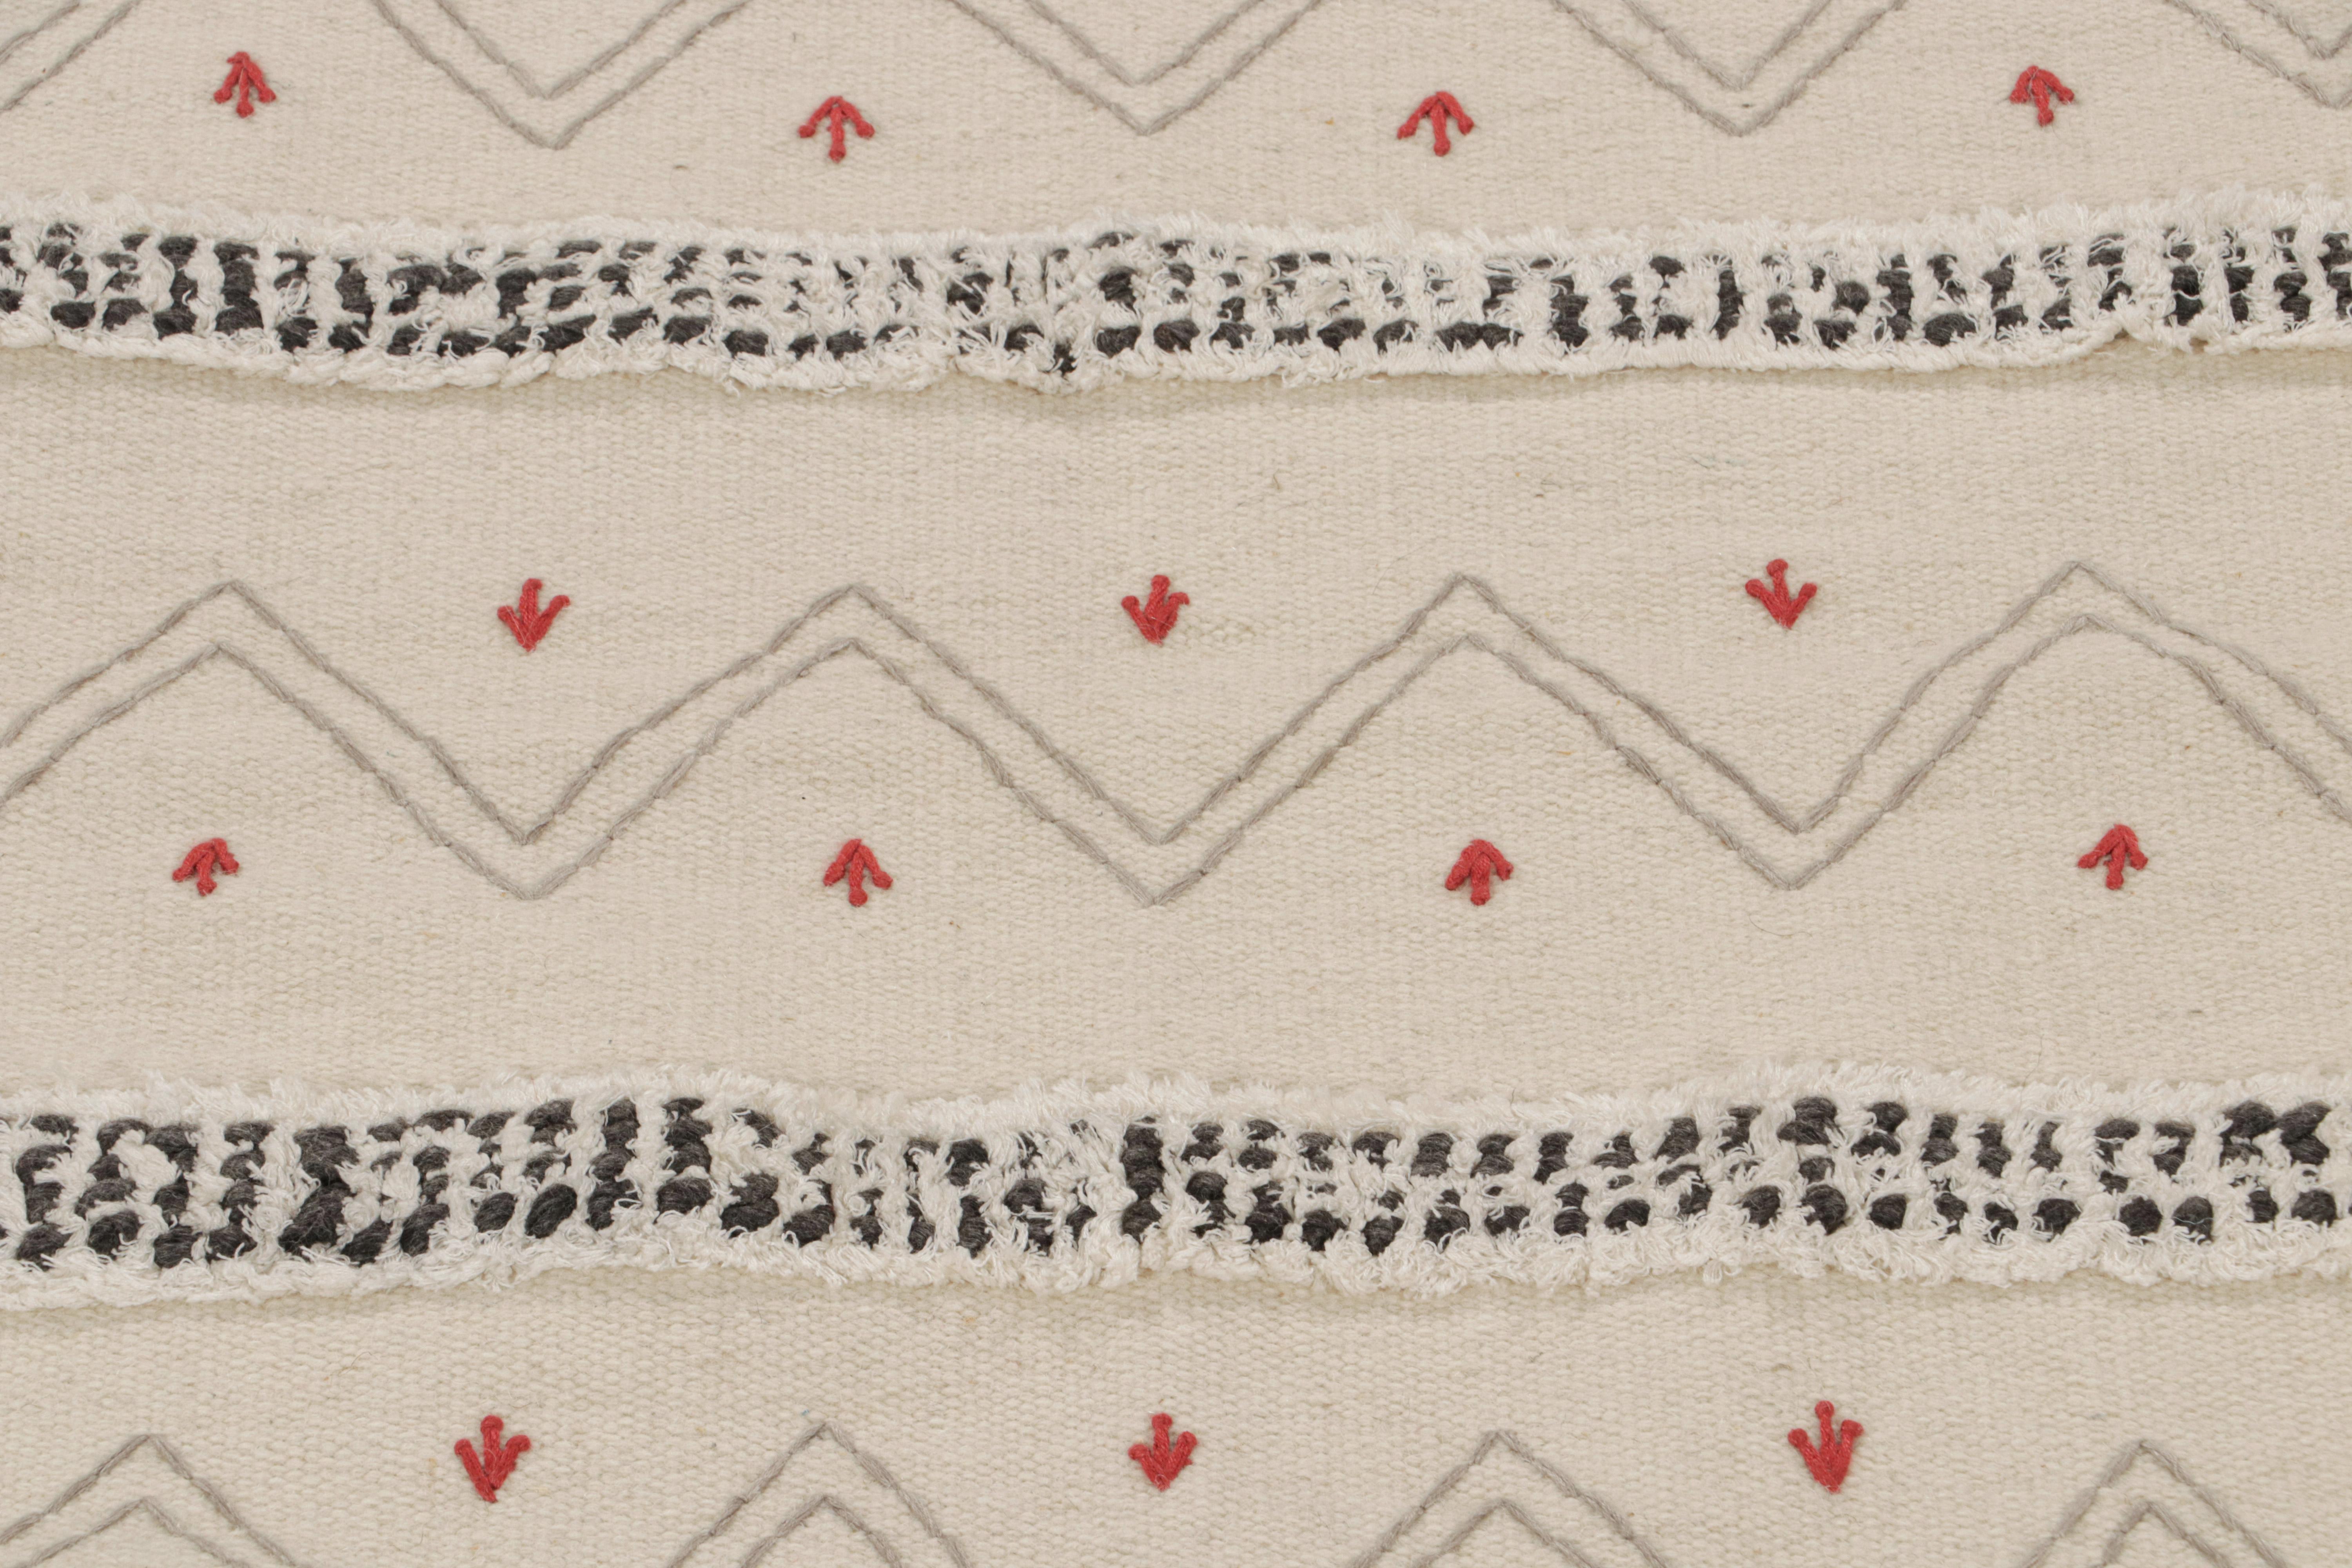 Indian Rug & Kilim’s Tribal-Style Kilim in off White, Gray and Red Geometric Patterns For Sale